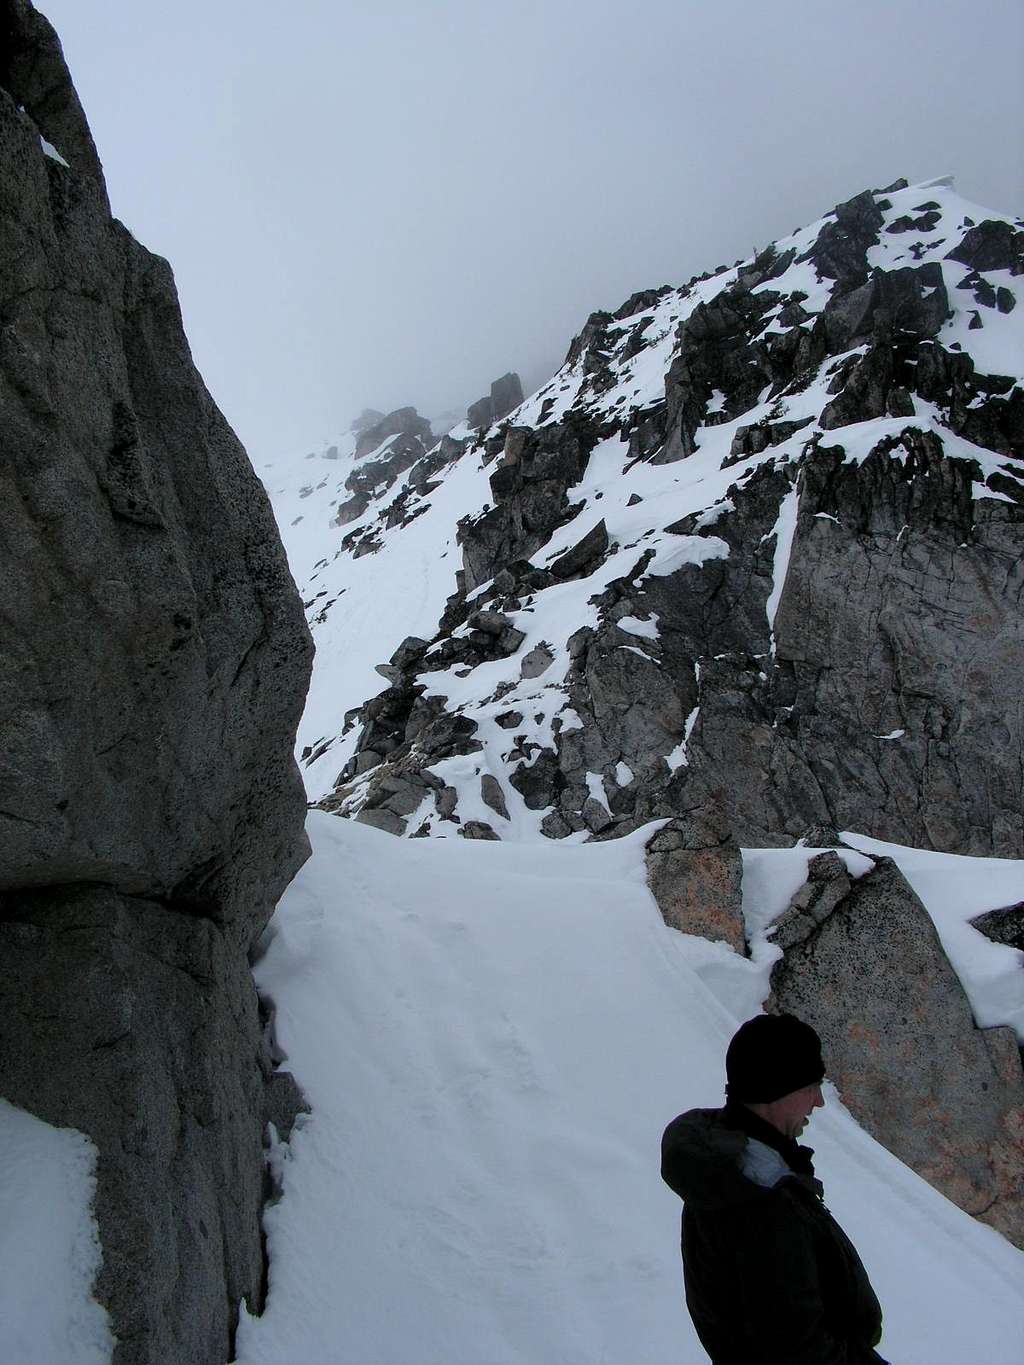 Looking at traverse to summit